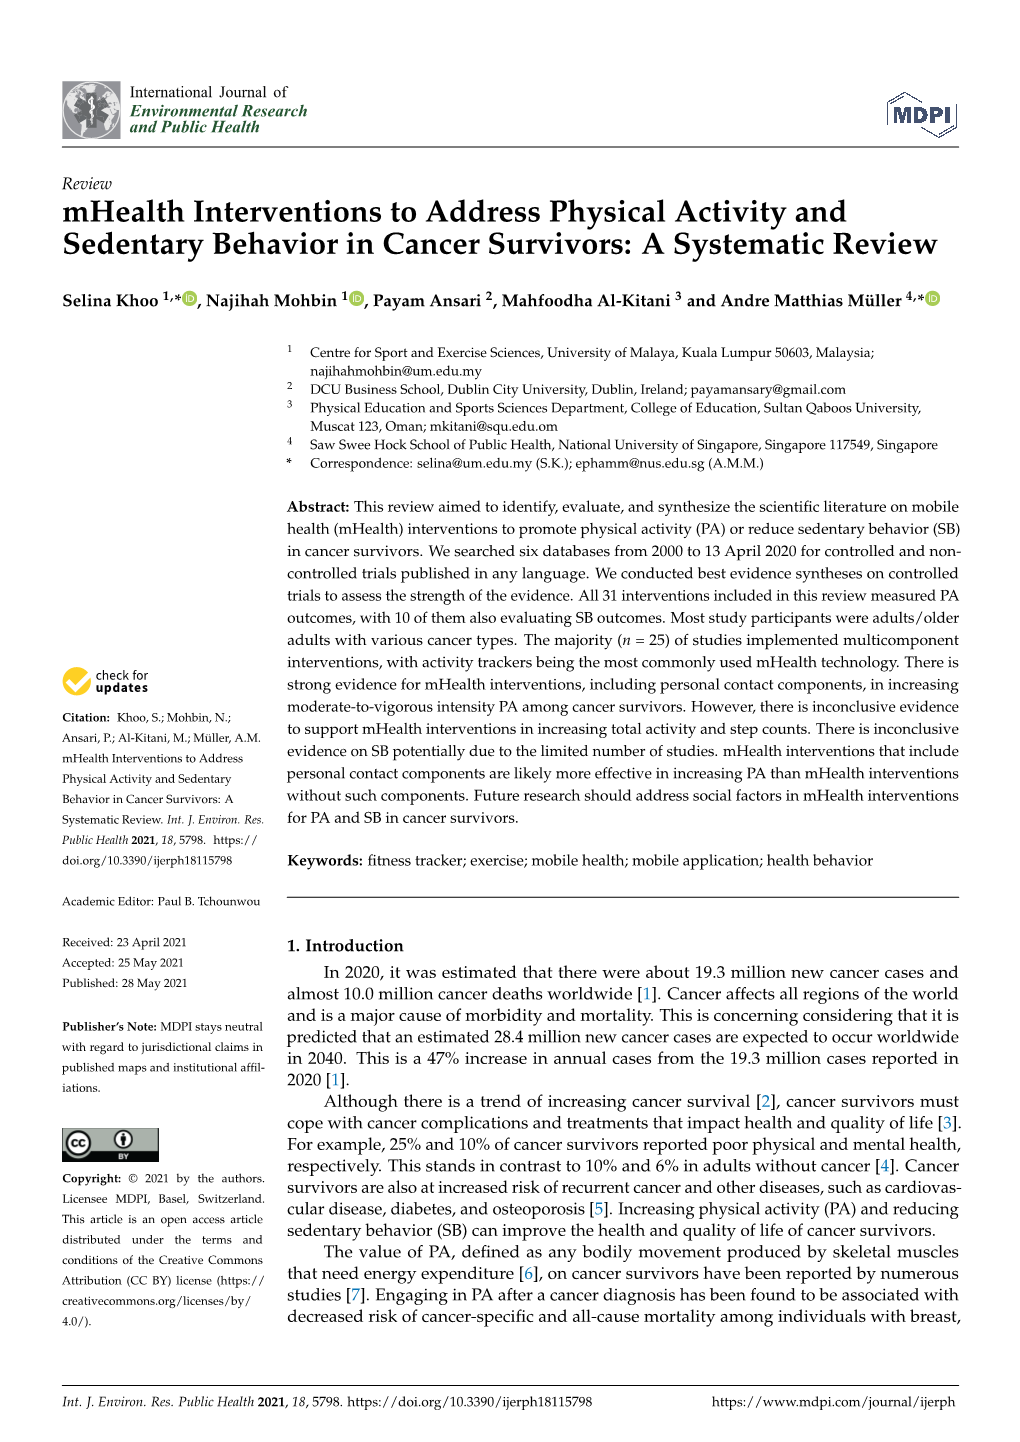 Mhealth Interventions to Address Physical Activity and Sedentary Behavior in Cancer Survivors: a Systematic Review